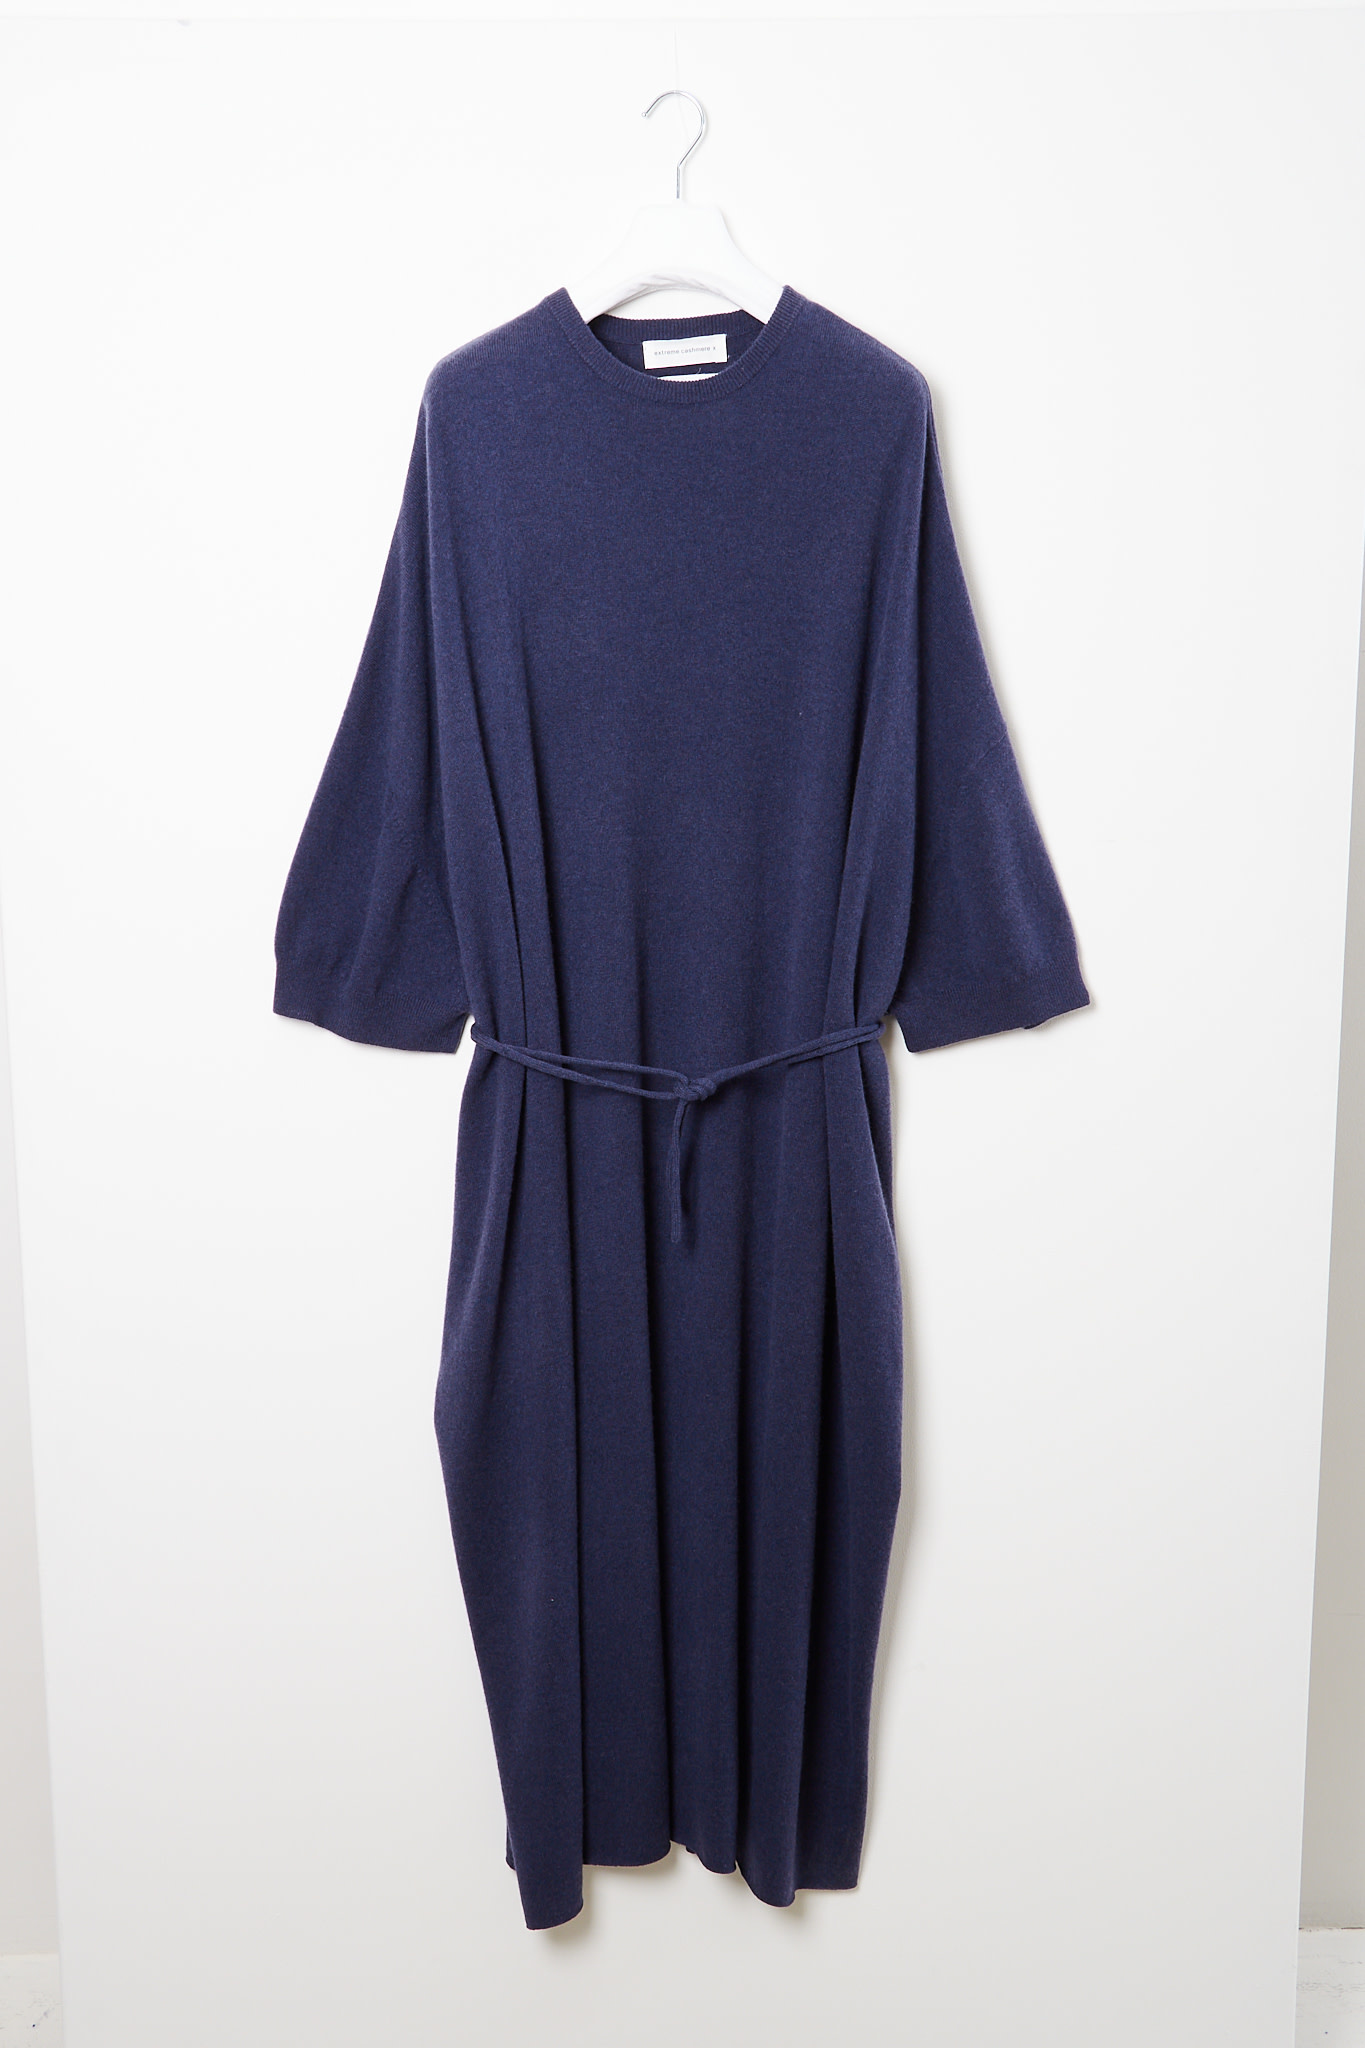 extreme cashmere - Ghost dress